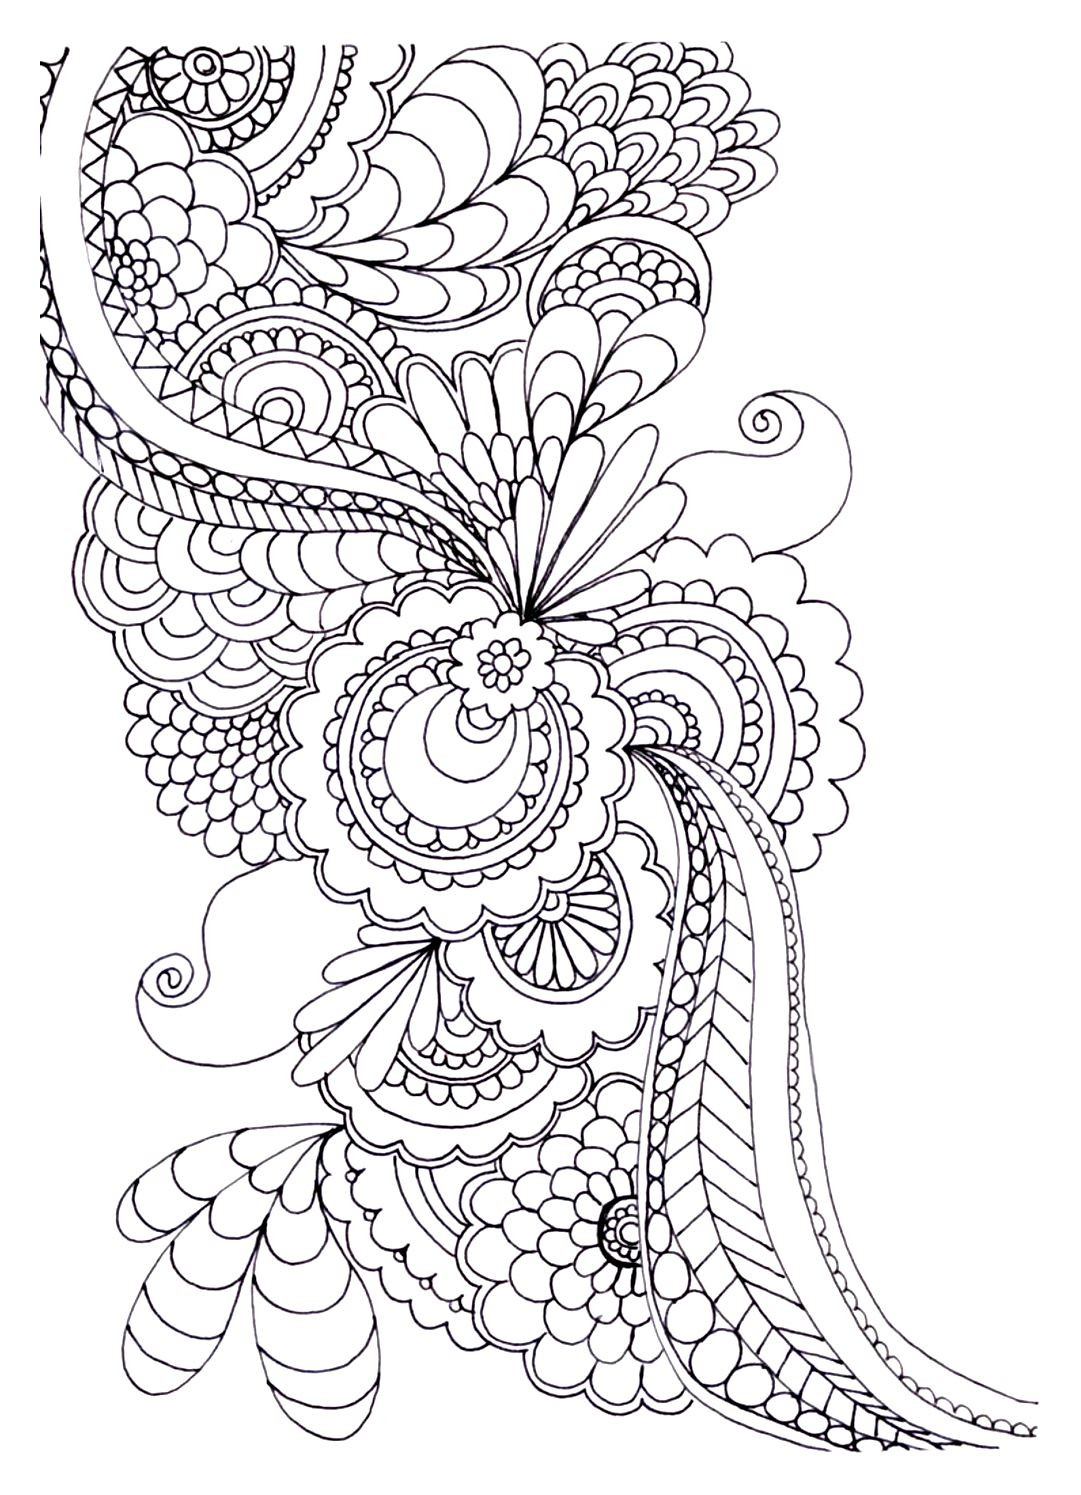 Adult Coloring Pages Pdf Free
 20 Free Adult Colouring Pages The Organised Housewife